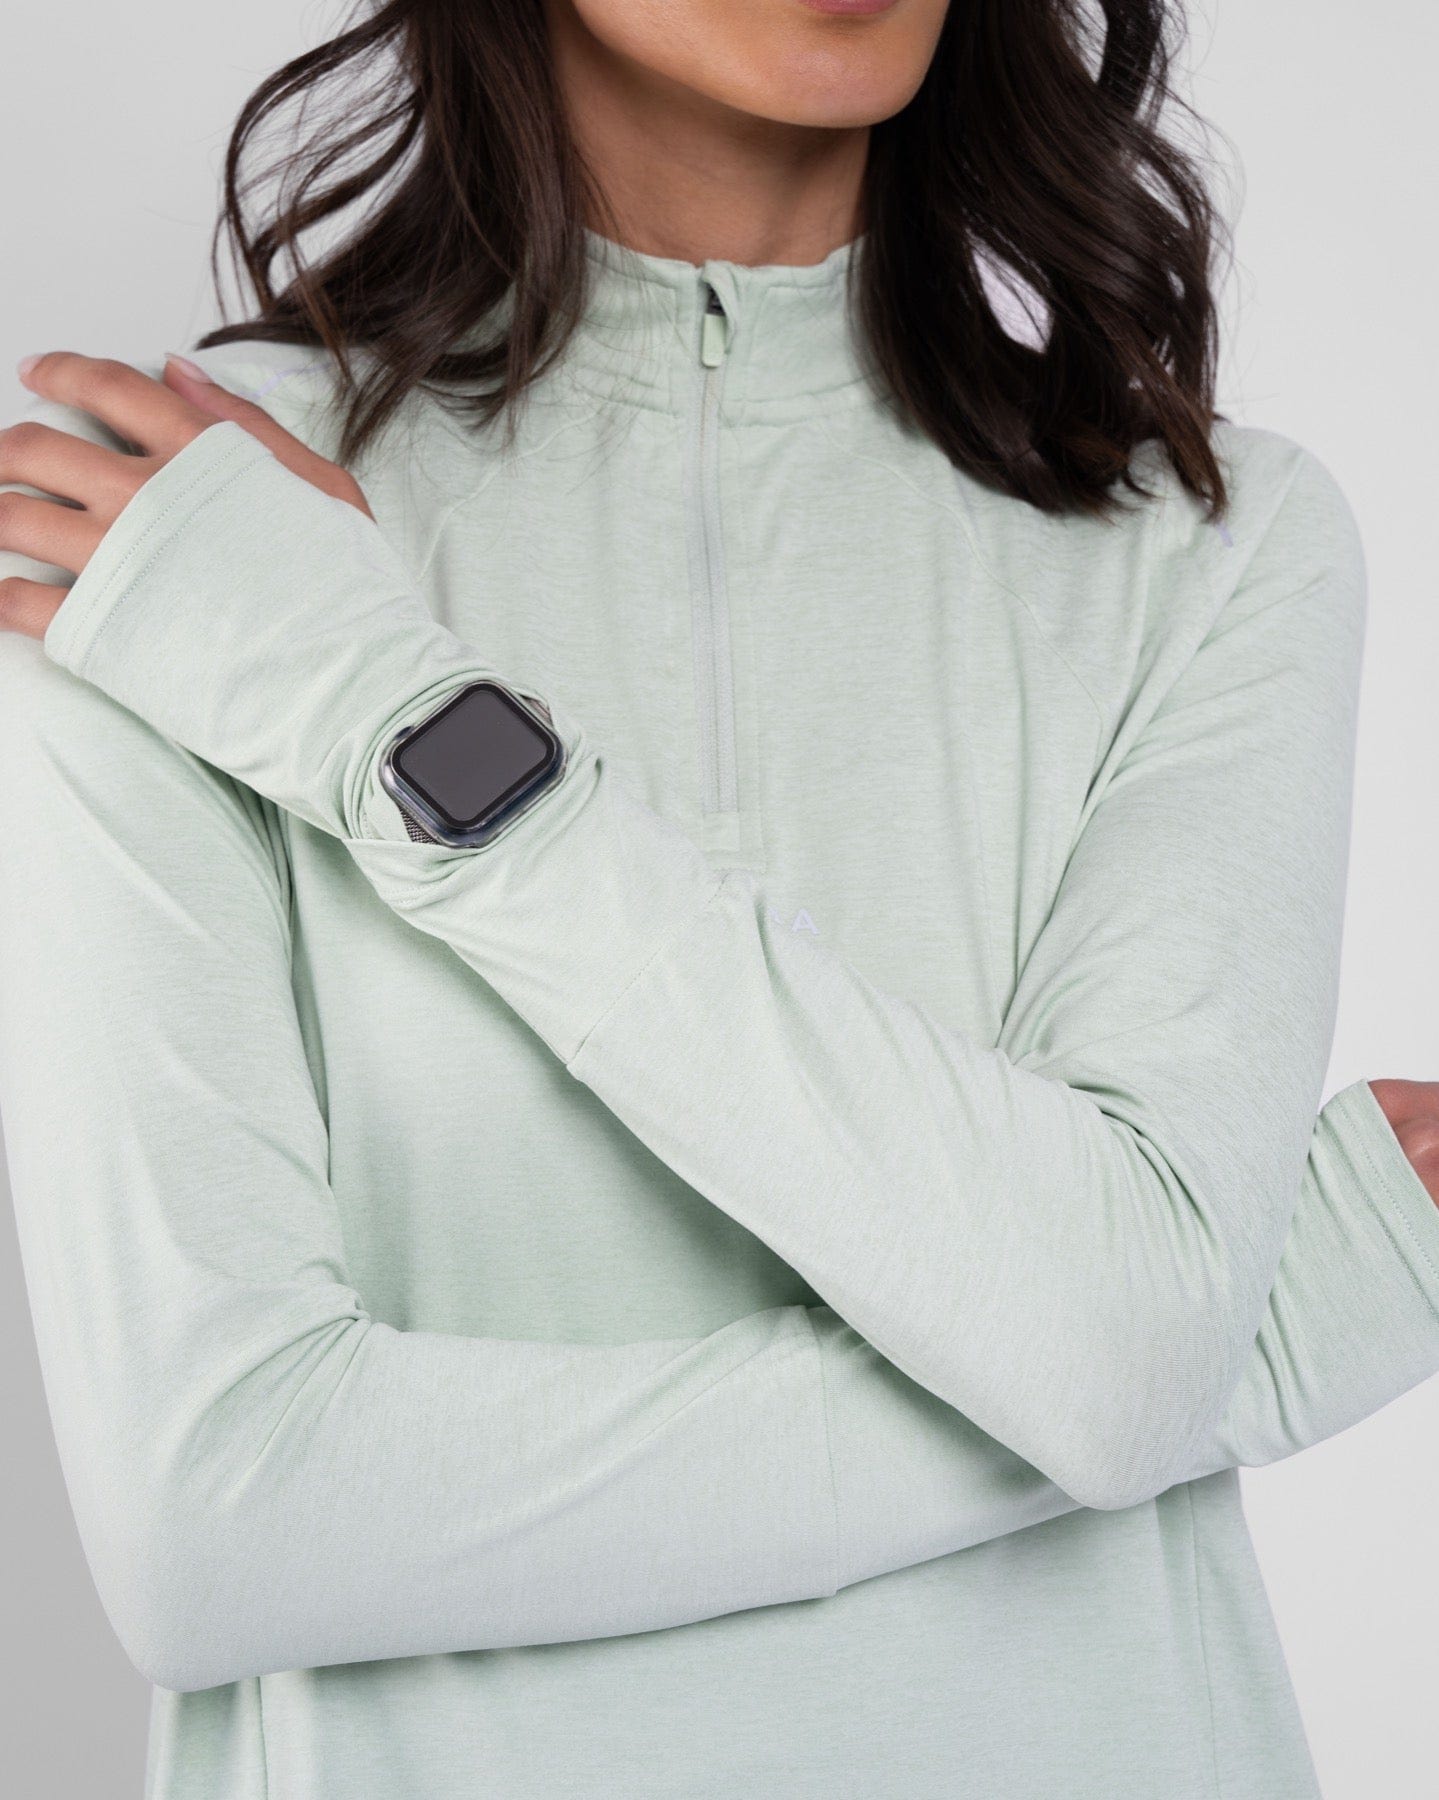 Close-up of a model wearing Sage high neck long sleeve shirt ARMA by Qynda with moisture-resistant fabric technology, sporting a smartwatch on her wrist, hand resting on her shoulder, against a grey background.